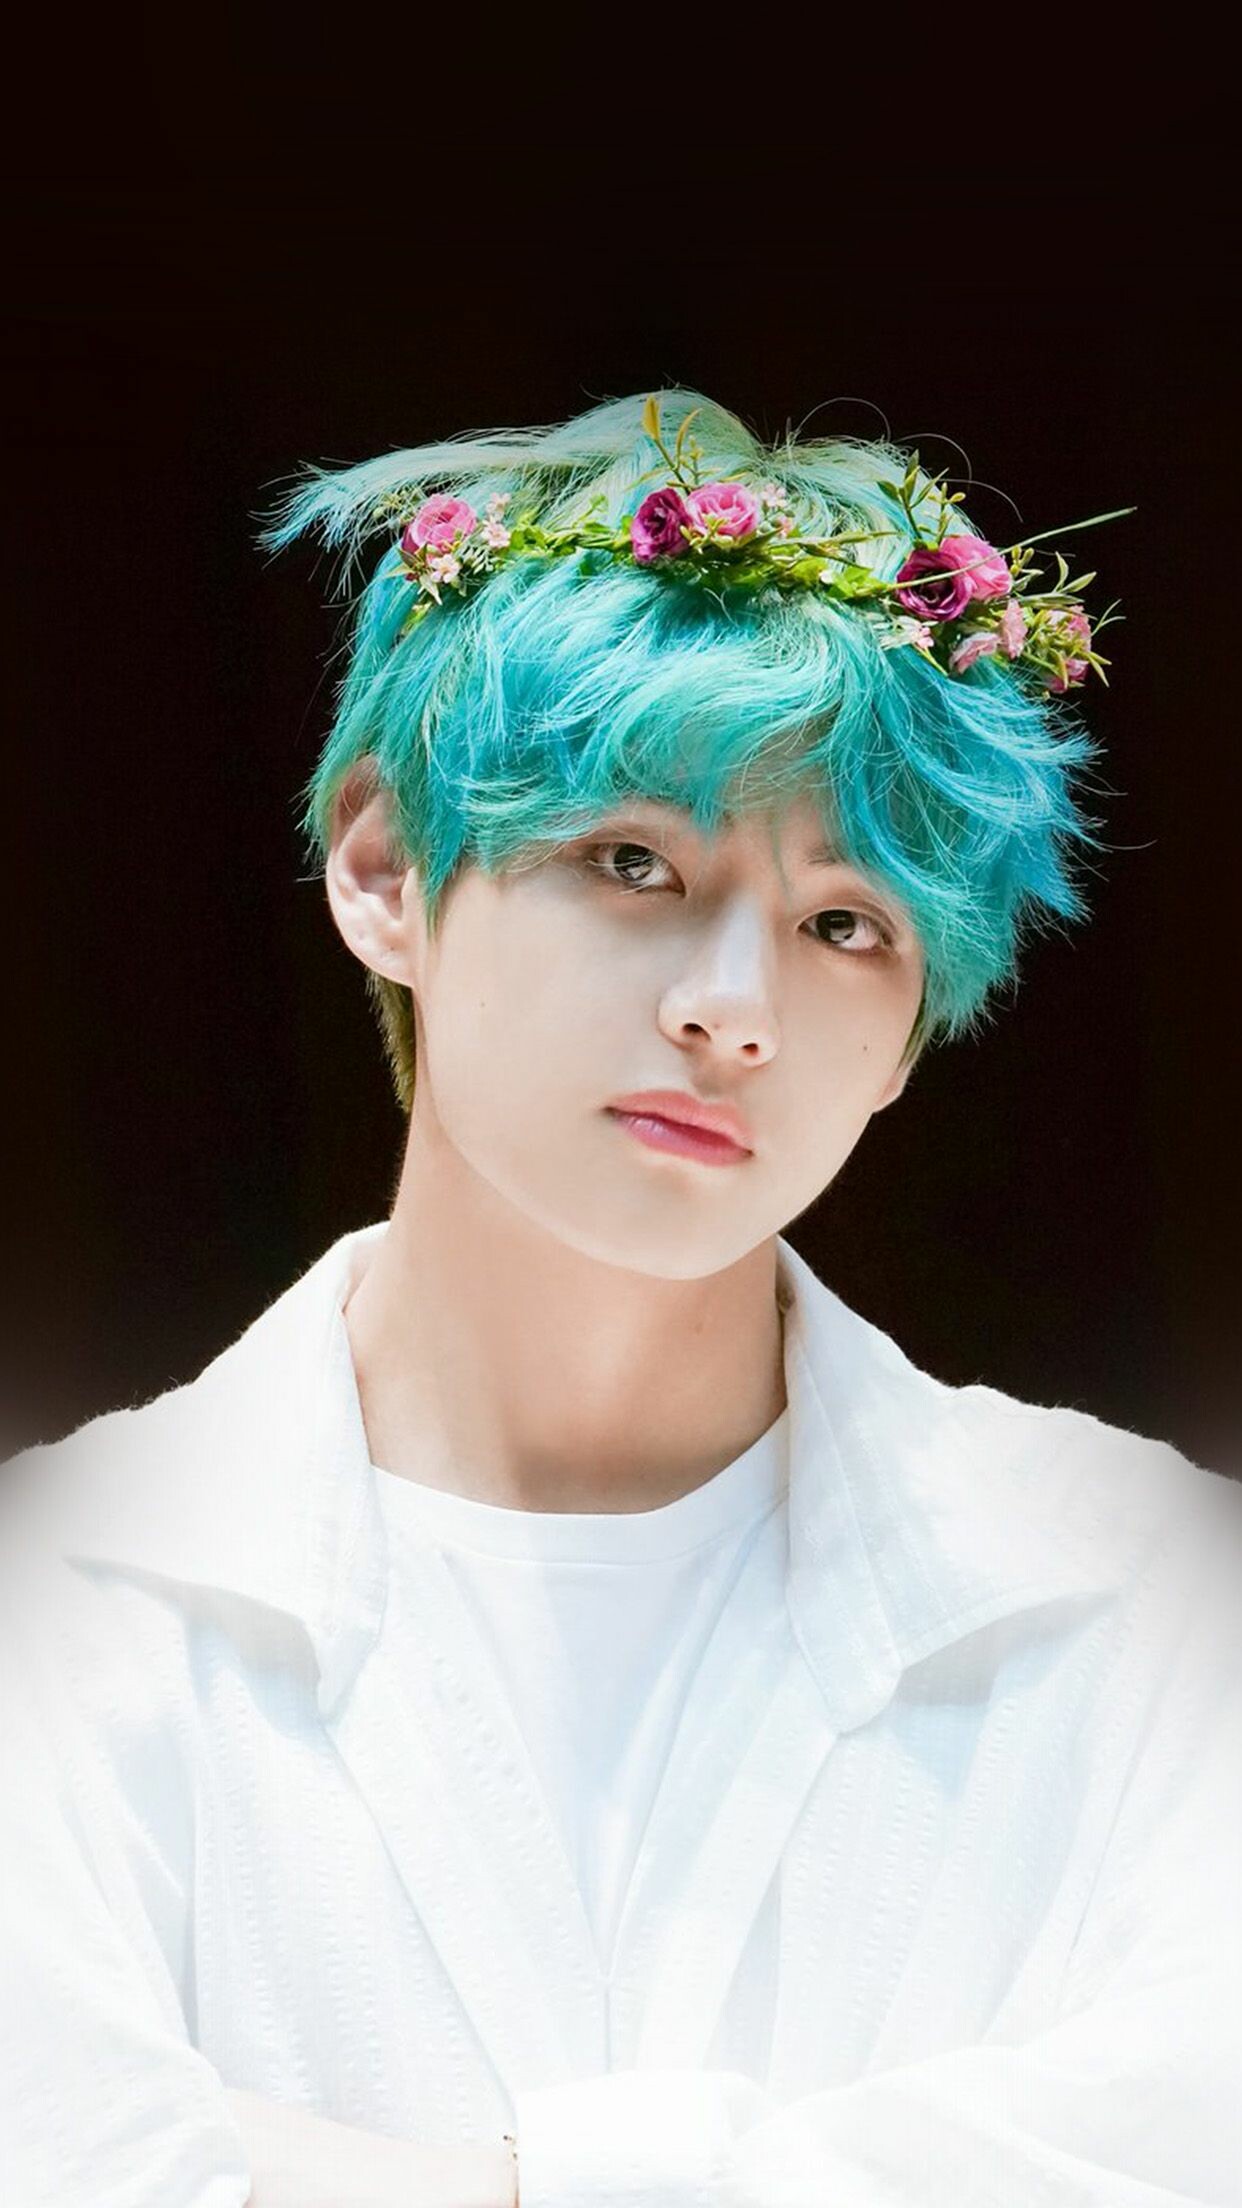 V (BTS): Kim Taehyung, Appointed Special Presidential Envoy for Future Generations and Culture by South Korean President Moon Jae-in, along with the other members of the band. 1250x2210 HD Background.